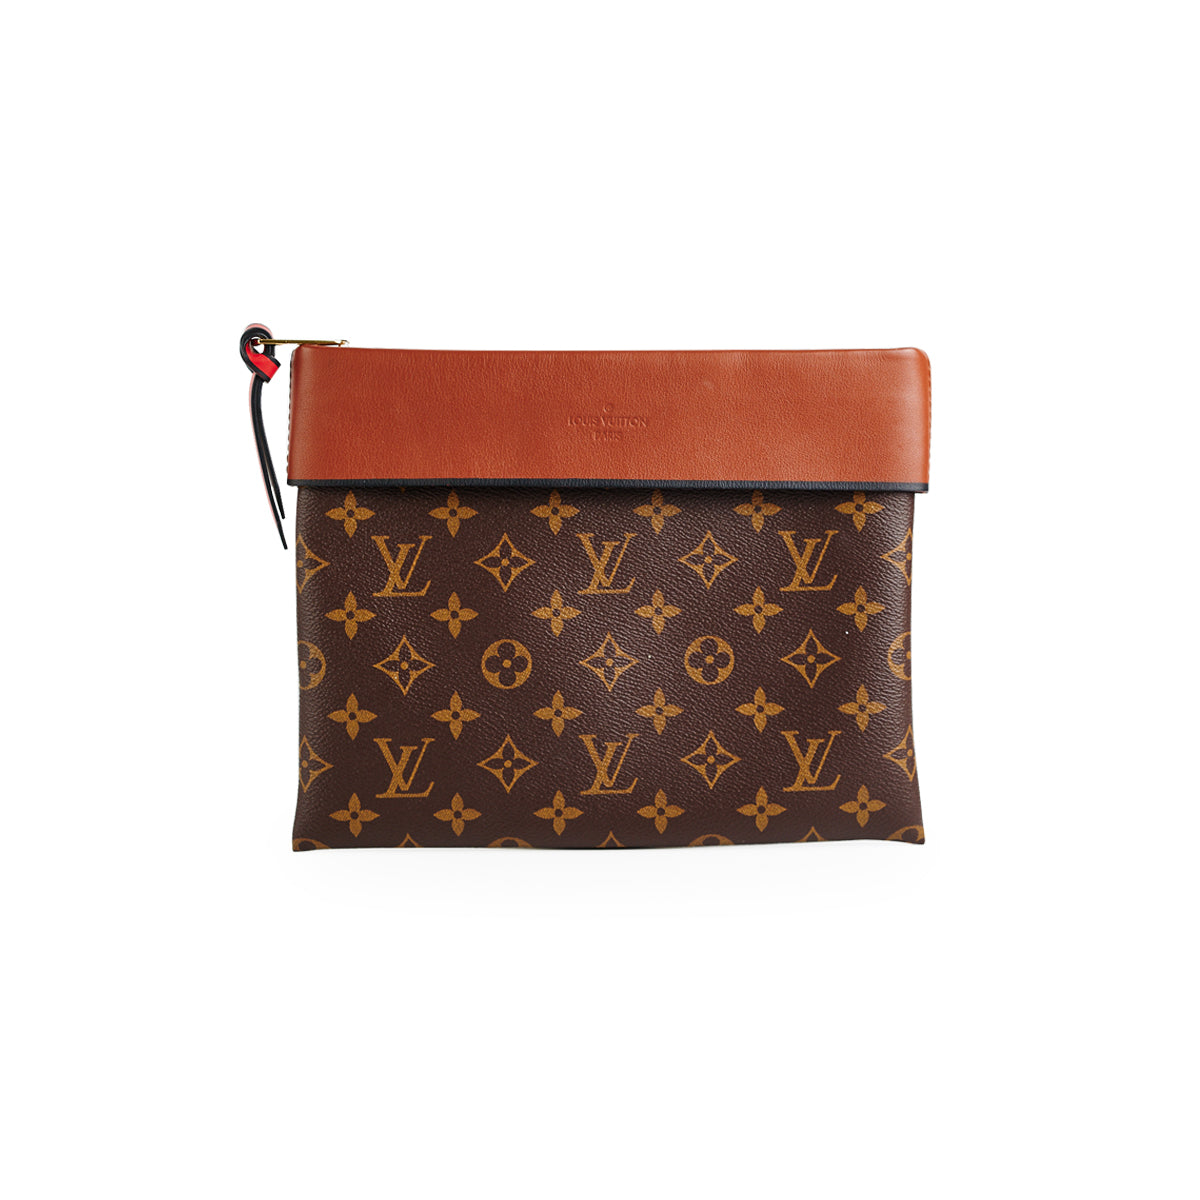 Saint-louis leather clutch bag Louis Vuitton Brown in Leather - 22882825